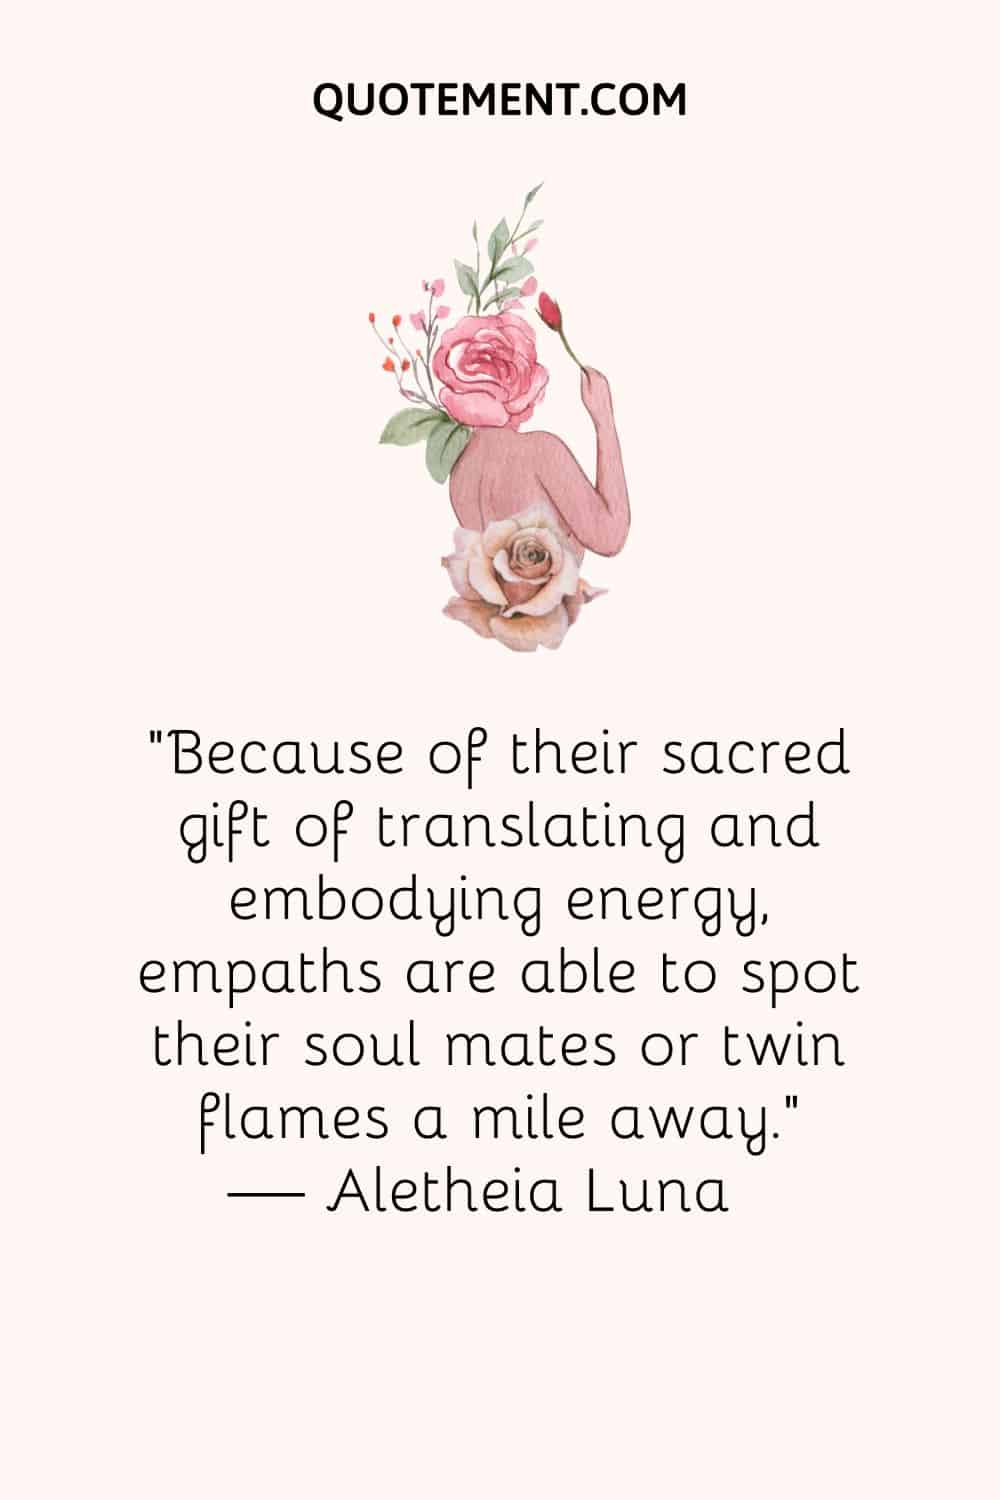 Because of their sacred gift of translating and embodying energy, empaths are able to spot their soul mates or twin flames a mile away